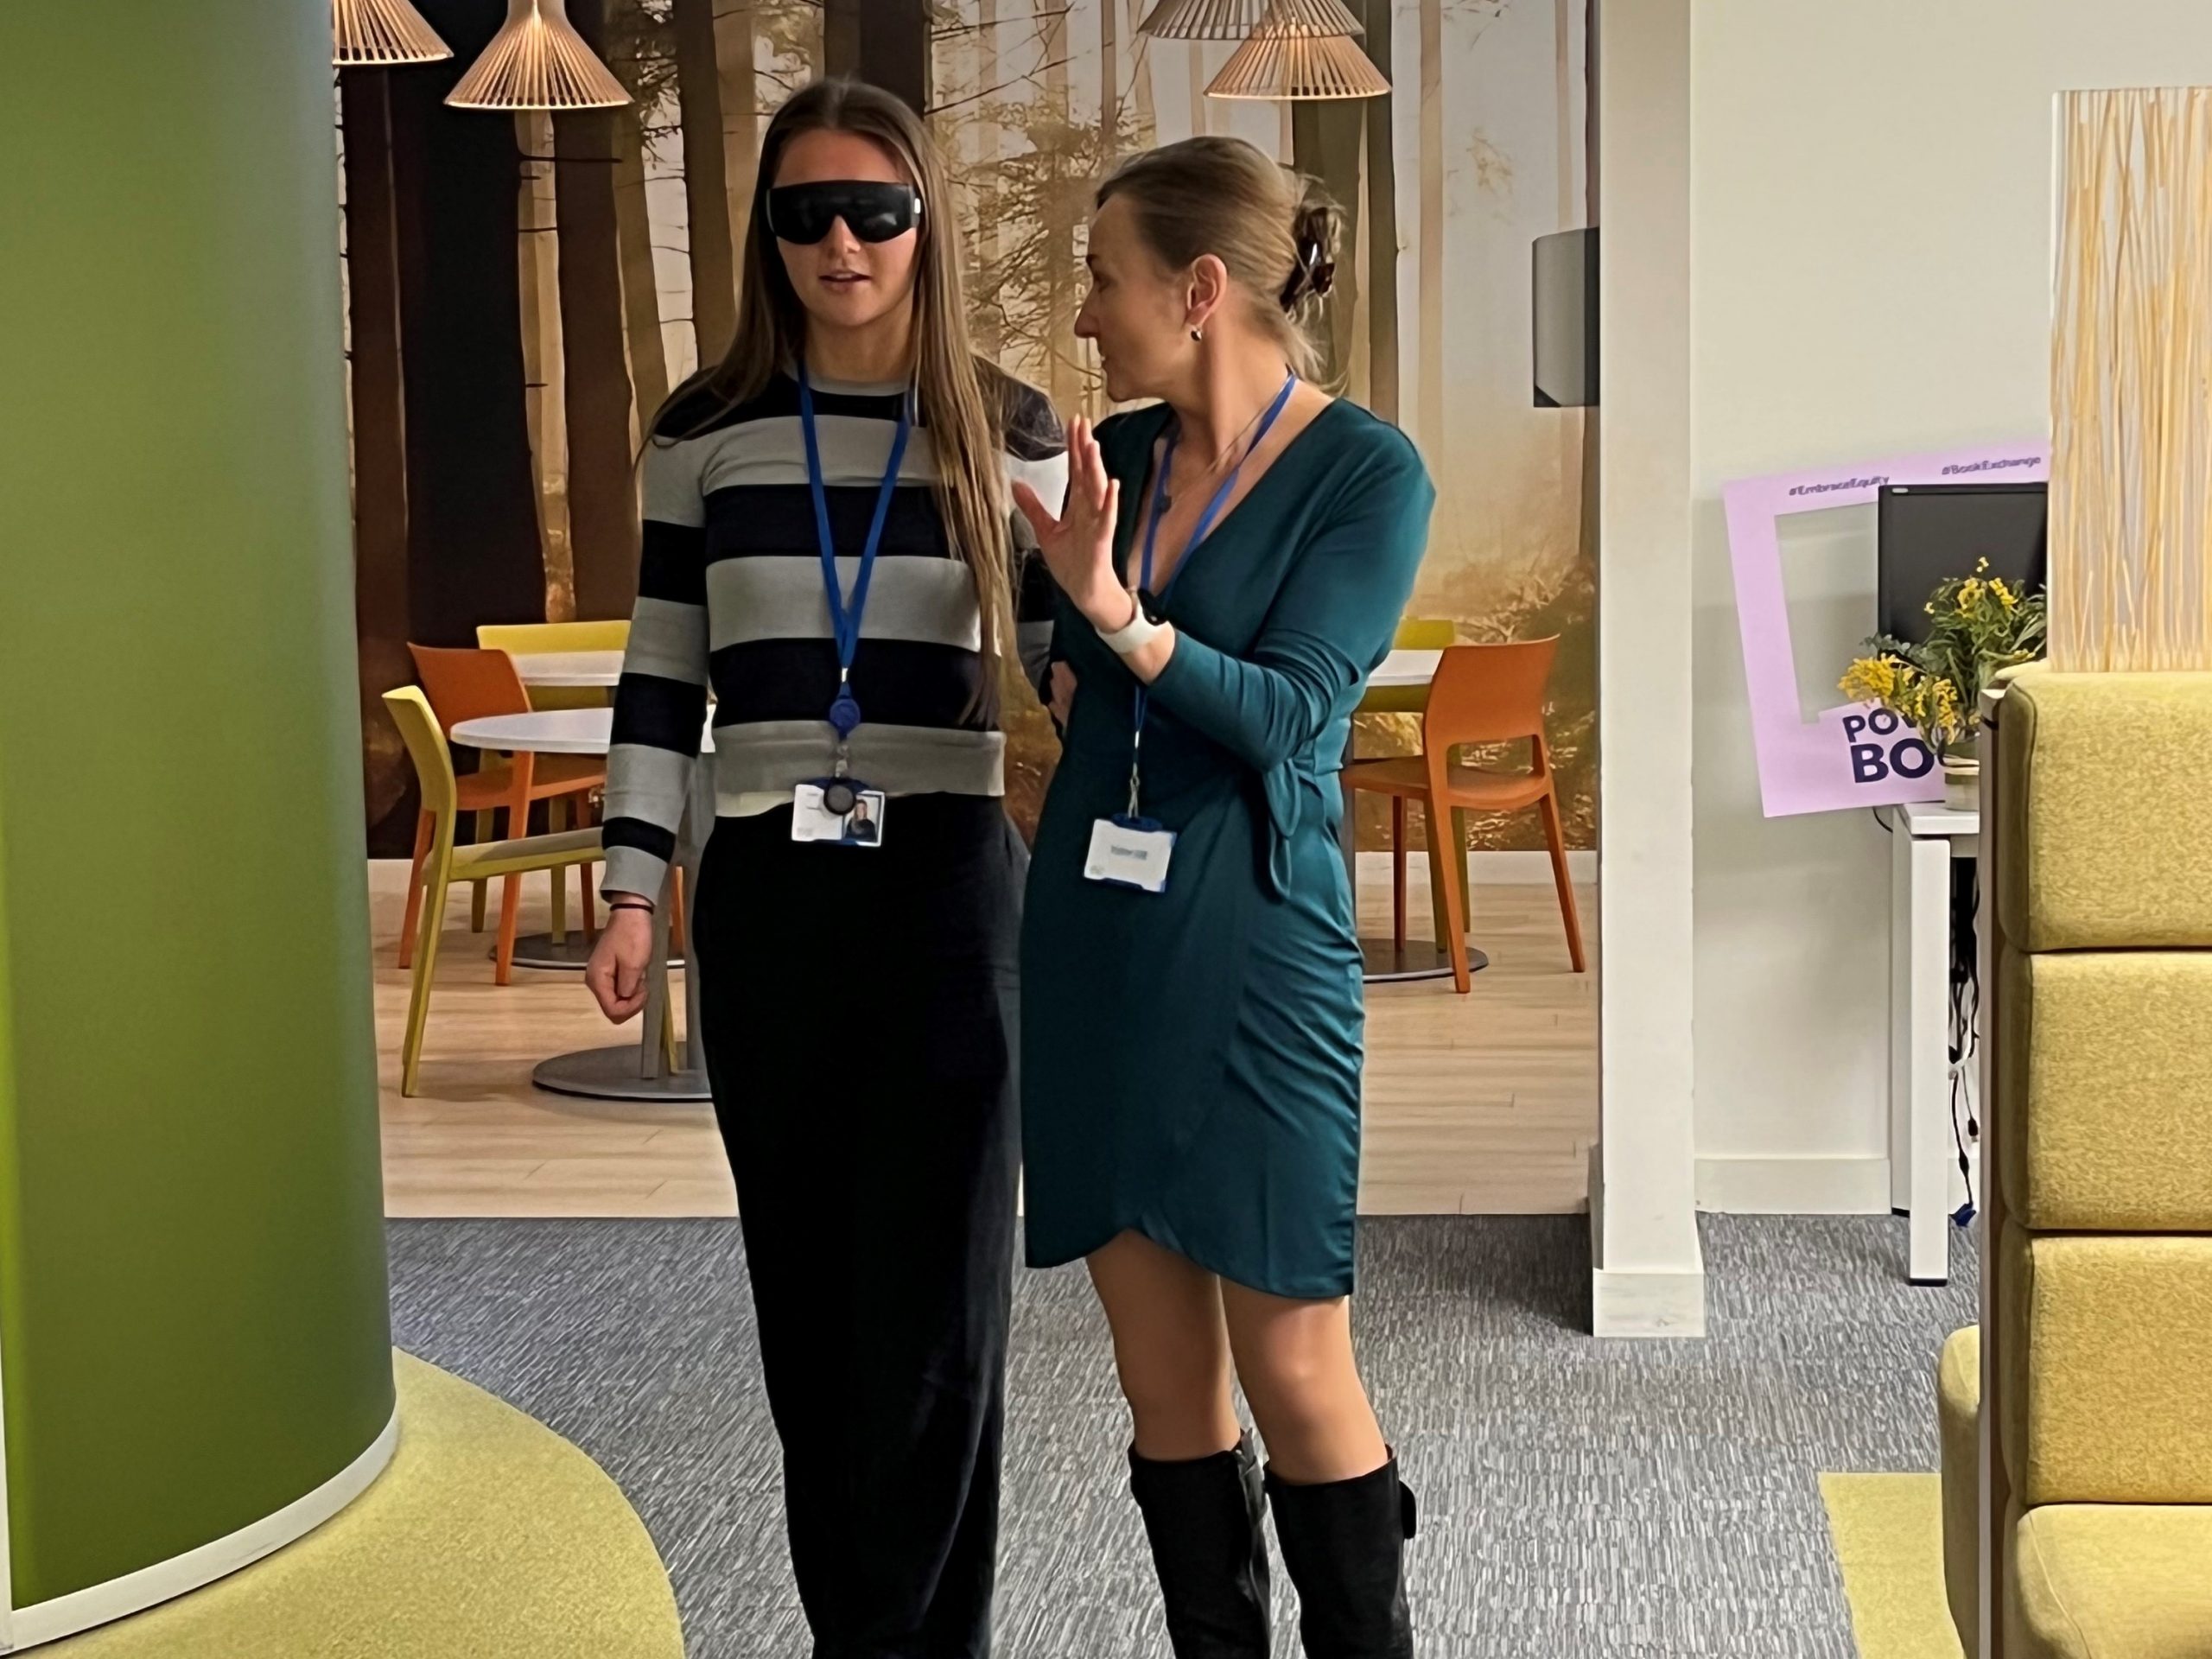 Jen Sweeny, Corporate Engagement Manager for Thomas Pocklington Trust, talking to a member of the Barclays team who is wearing sim specs during sighted guide training.